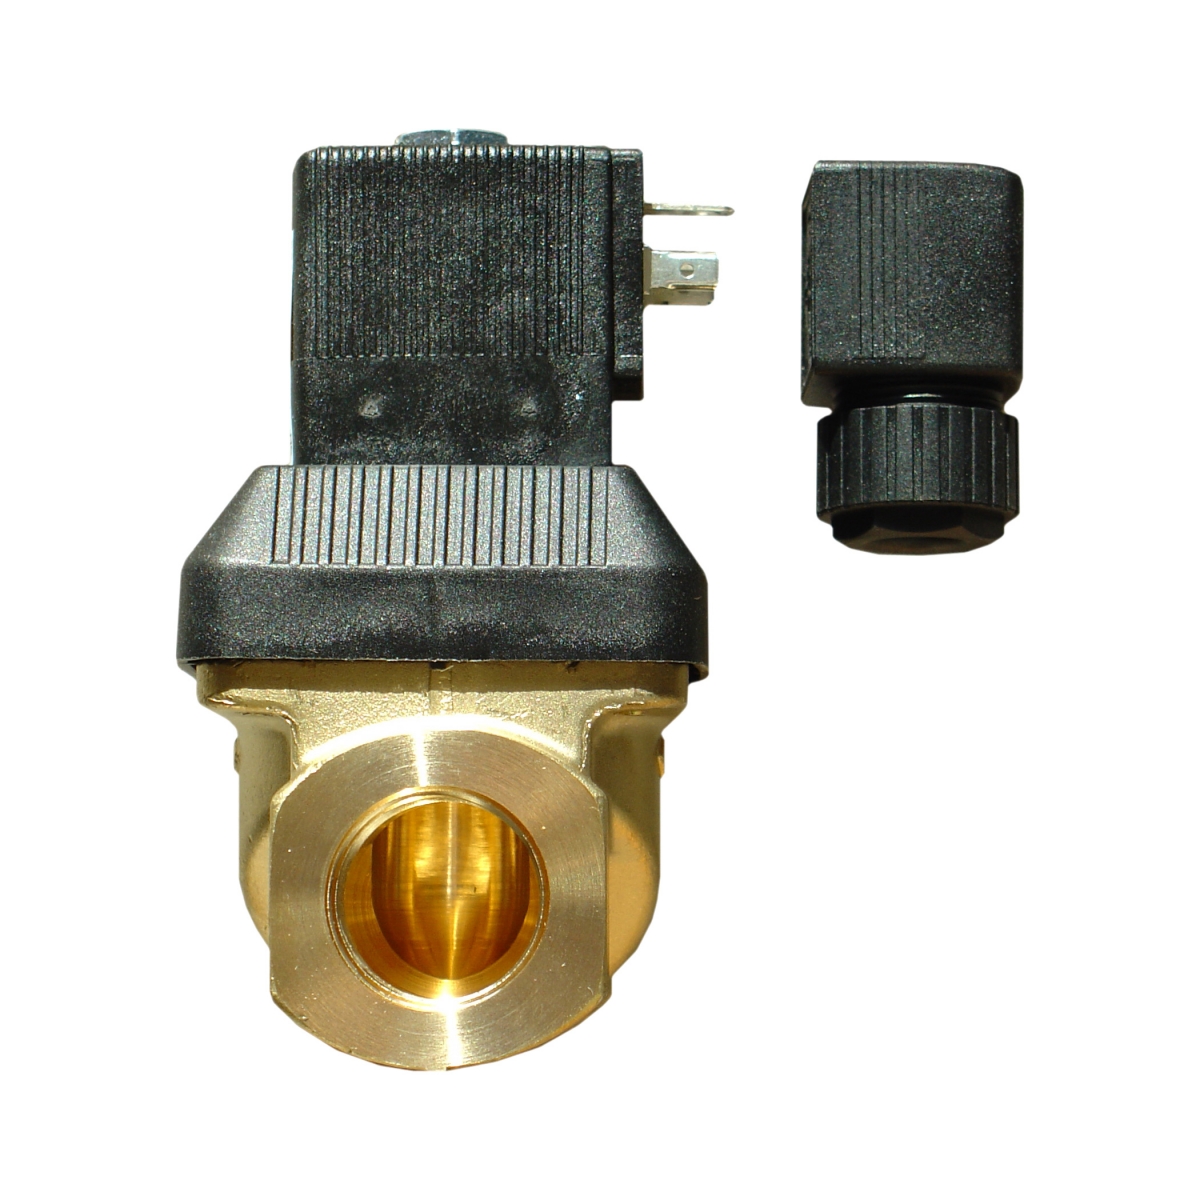 High quality solenoid valve made of brass ¾”, 230VAC, normally closed High quality solenoid valve made of brass ¾”, 230VAC, normally closed